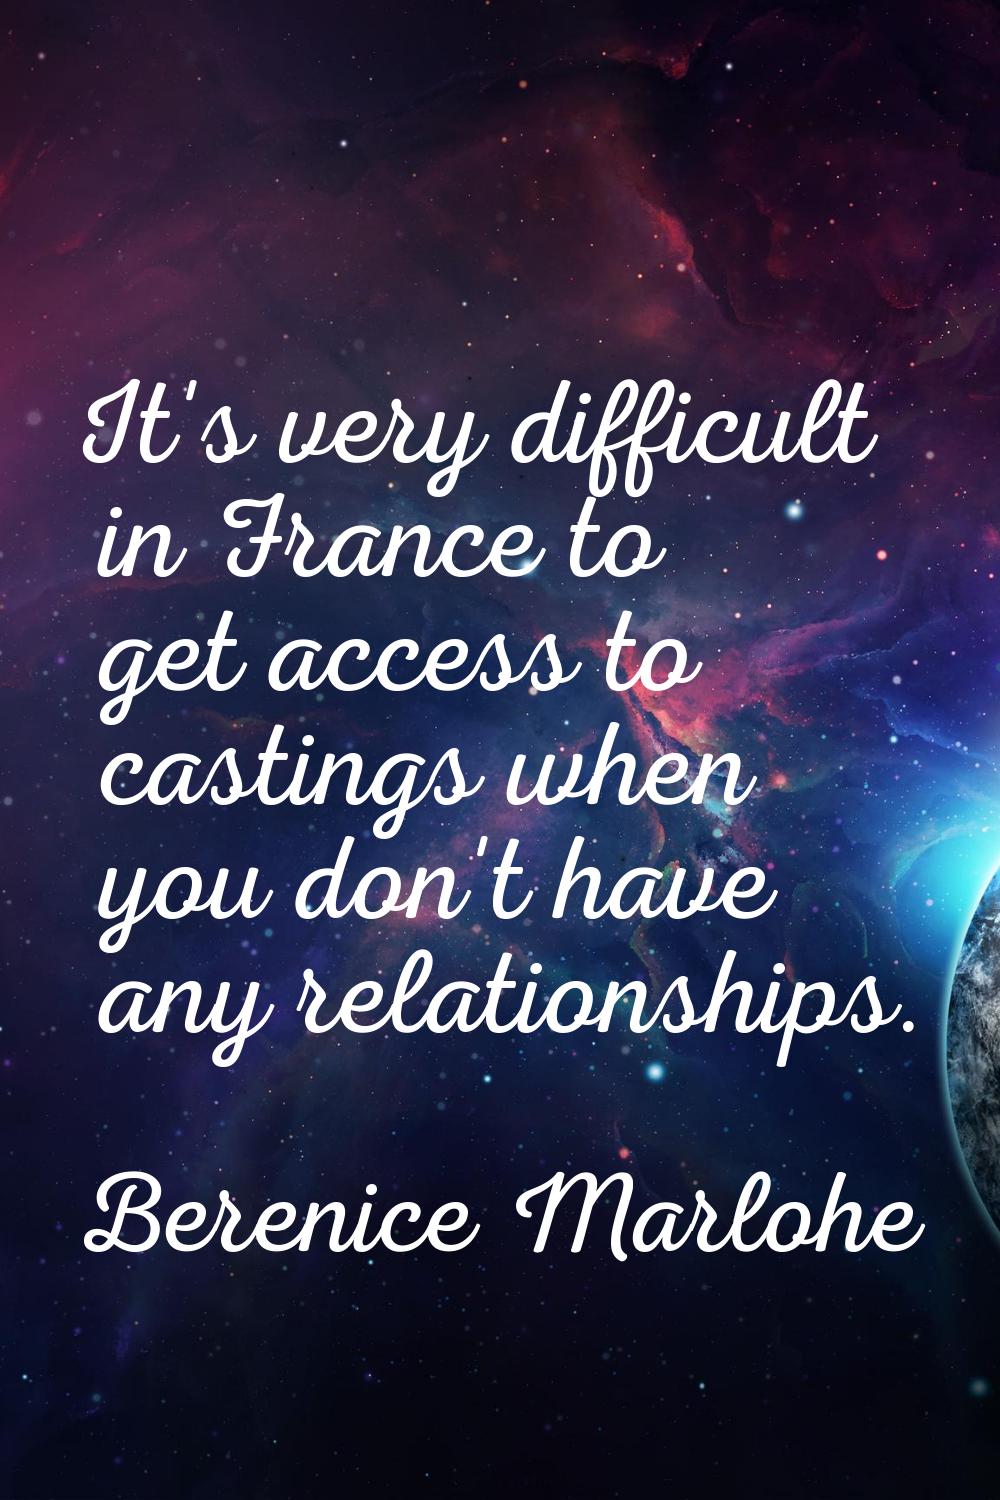 It's very difficult in France to get access to castings when you don't have any relationships.